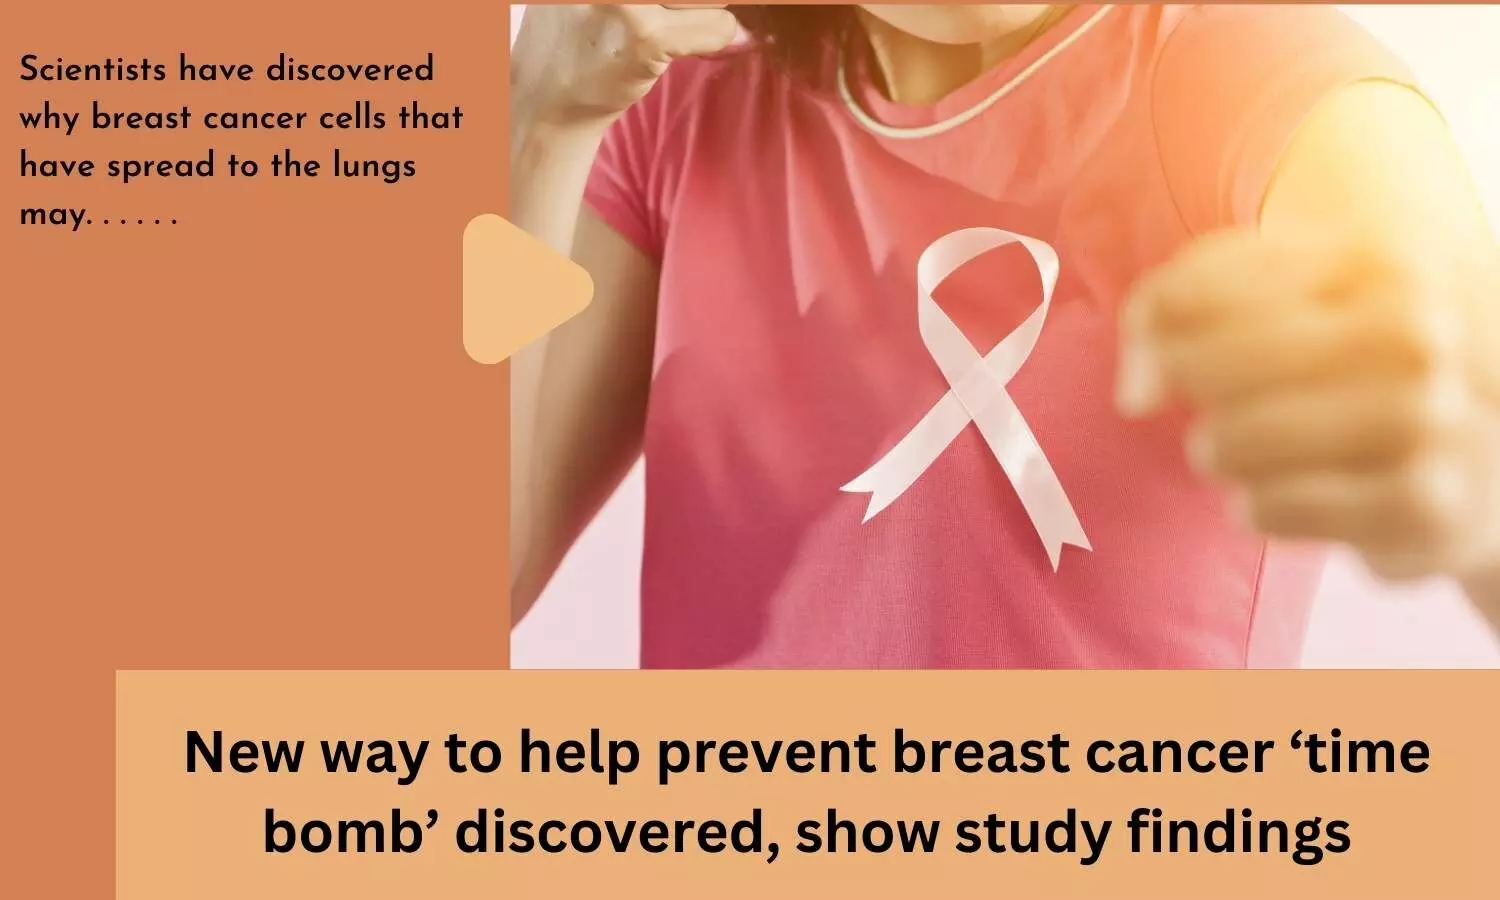 New way to help prevent breast cancer time bomb discovered, show study findings